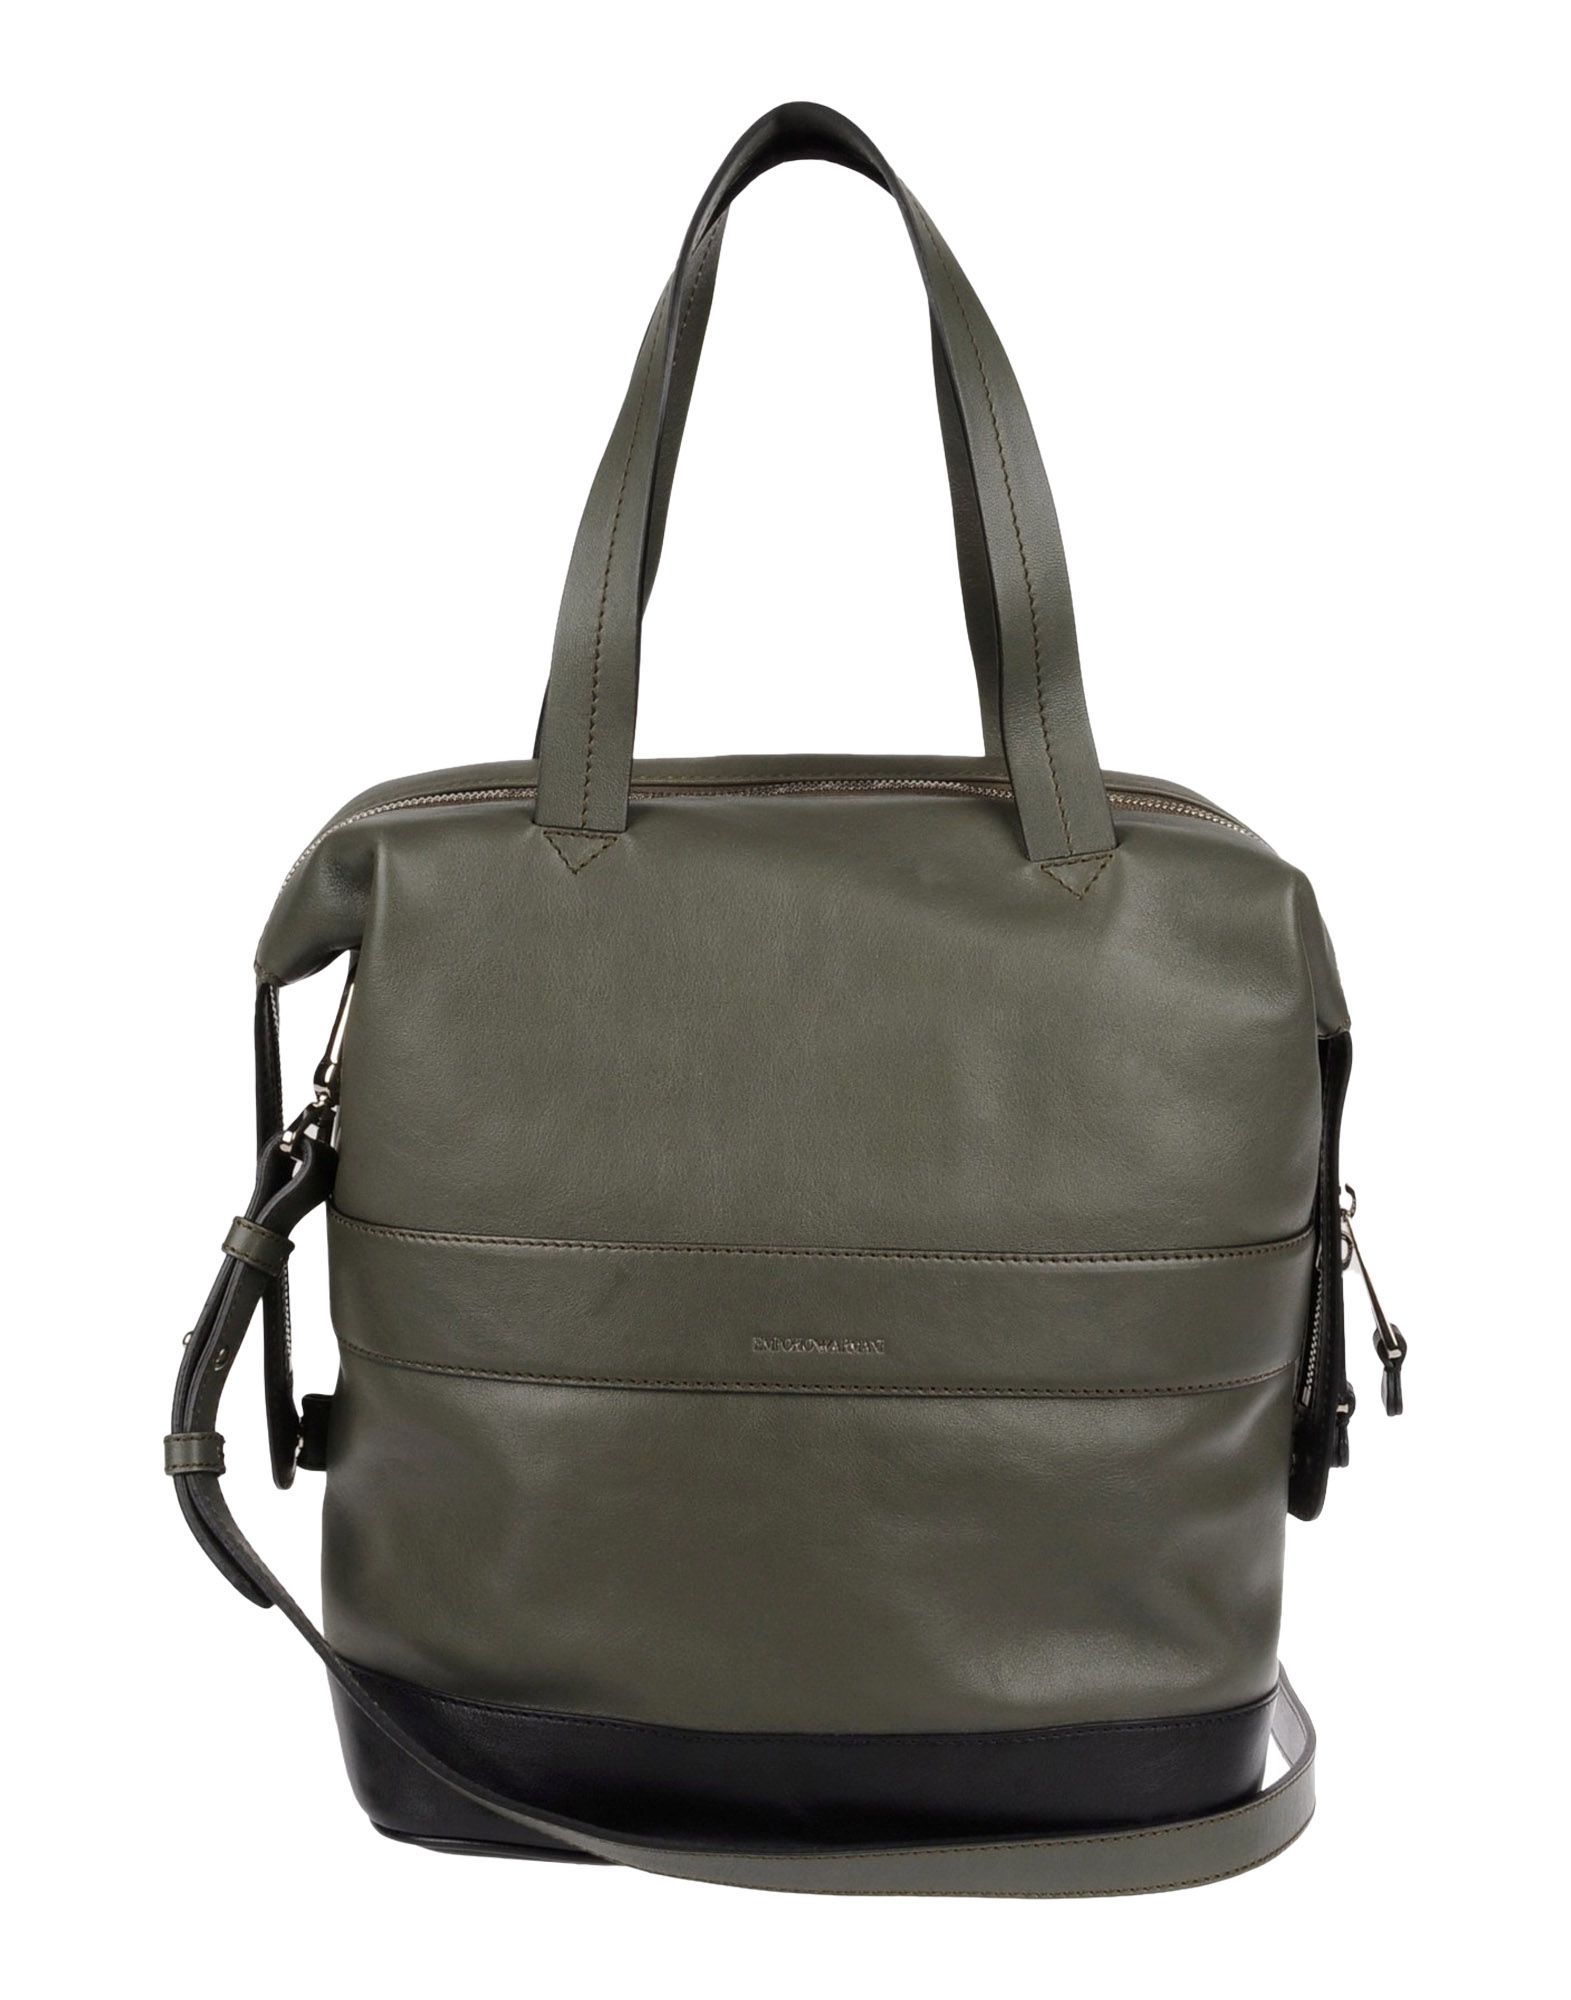 Emporio Armani Shoulder Bag in Green (Military green) | Lyst